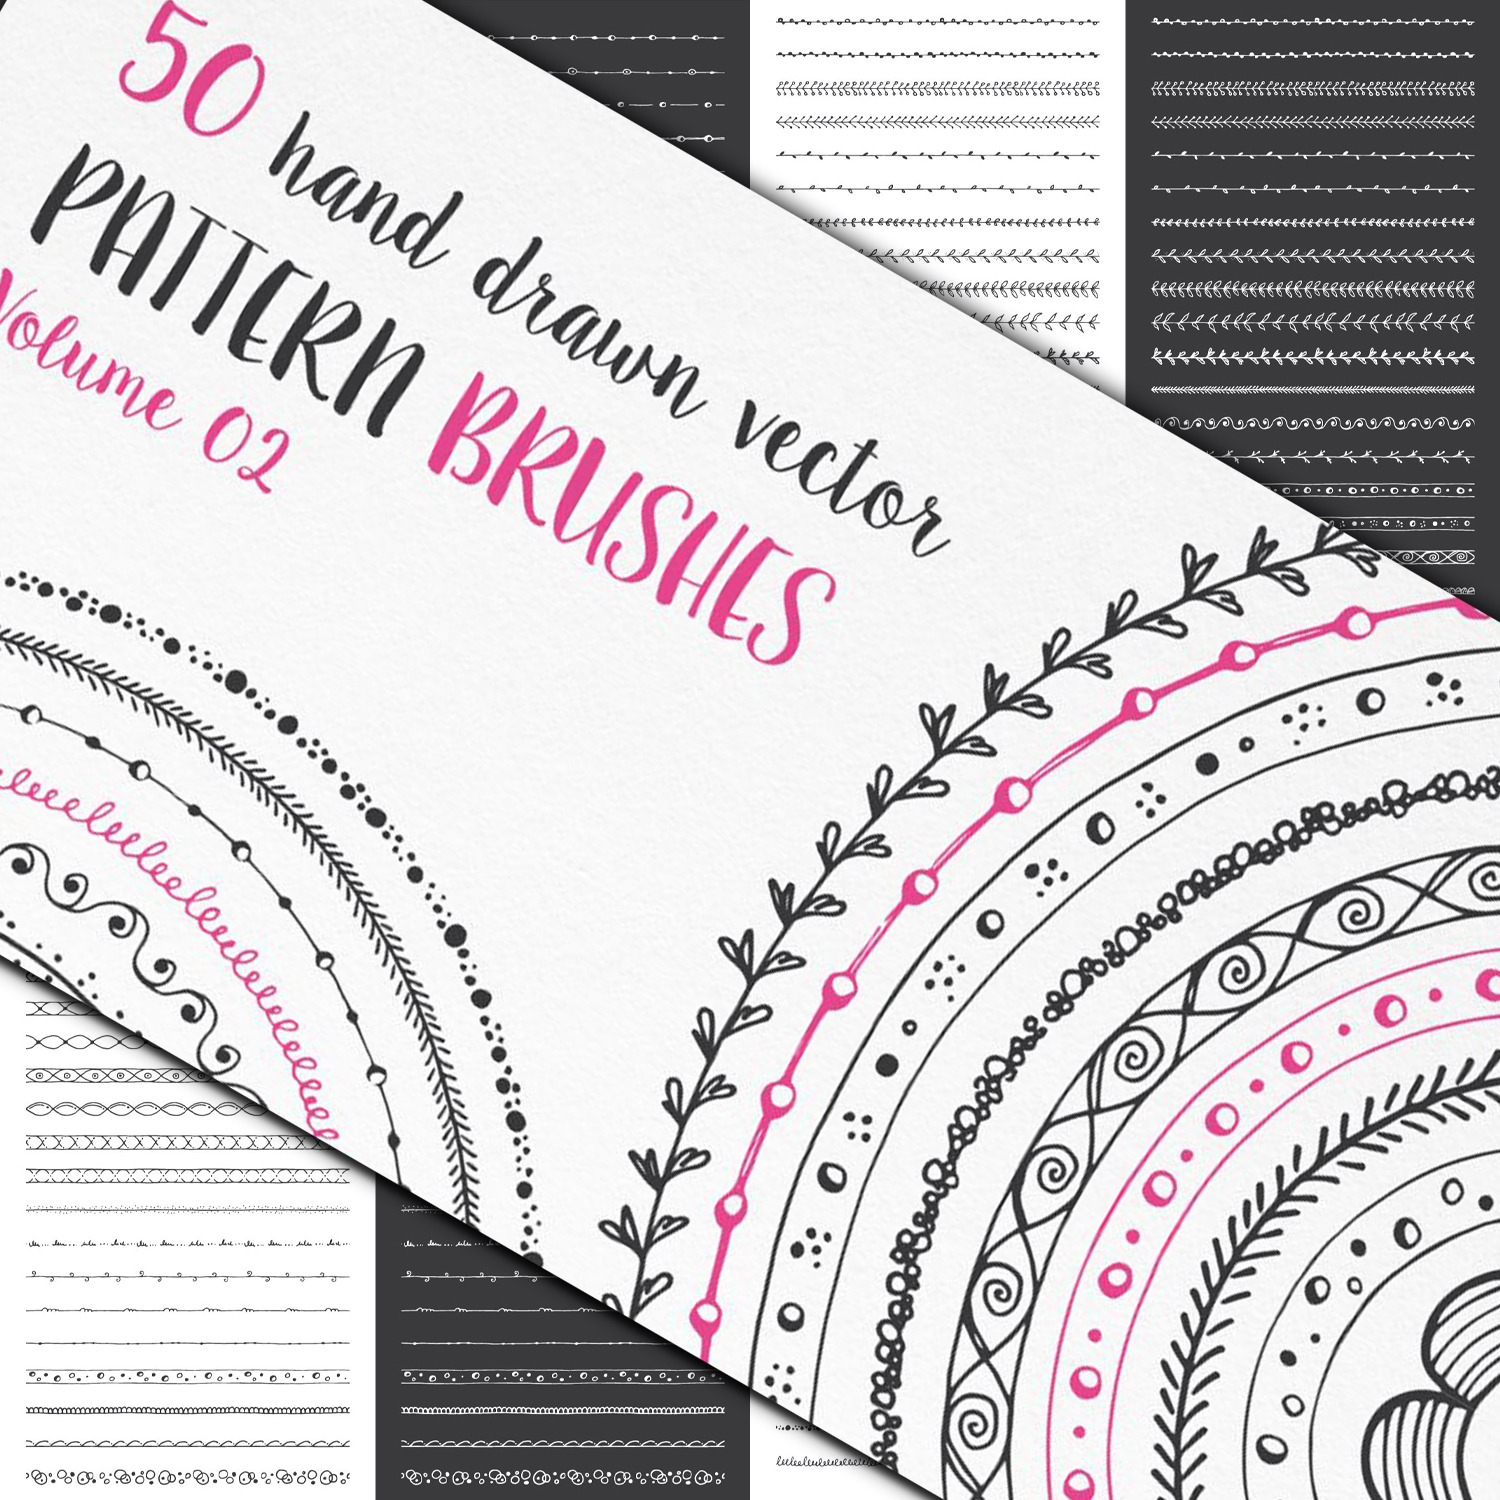 Preview hand drawn pattern brushes vol 02.